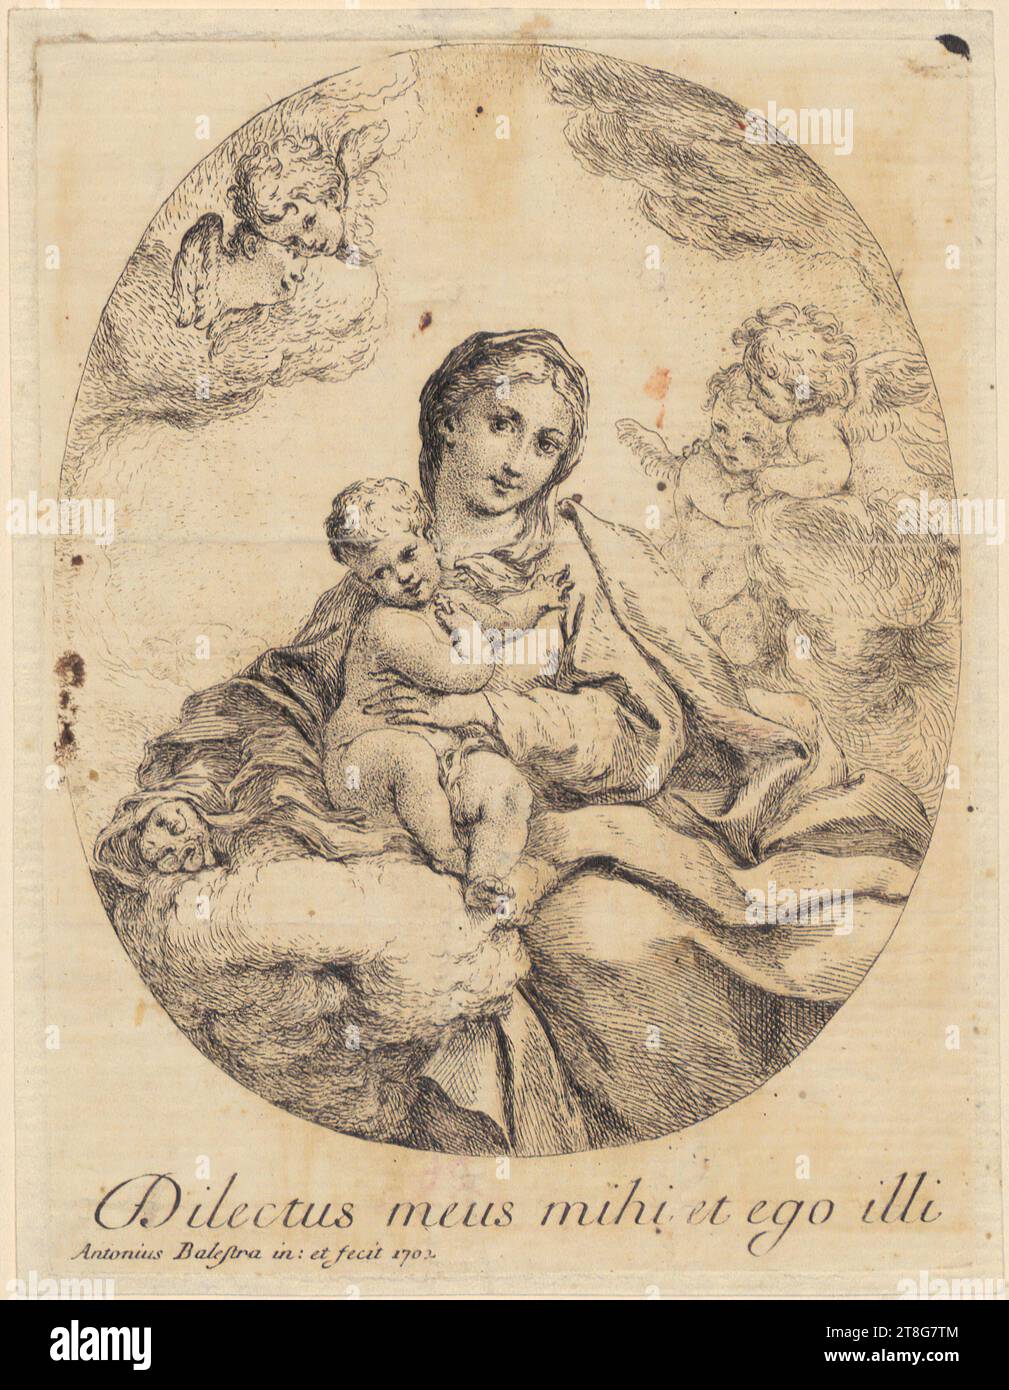 Antonio Balestra (1666 - 1740), Madonna and Child, print carrier: 1702, etching, sheet size: 16.3 x 12.5 cm, bottom left to right inscribed 'Dilectus meus mihi et ego illi' and bottom left signed and Stock Photo